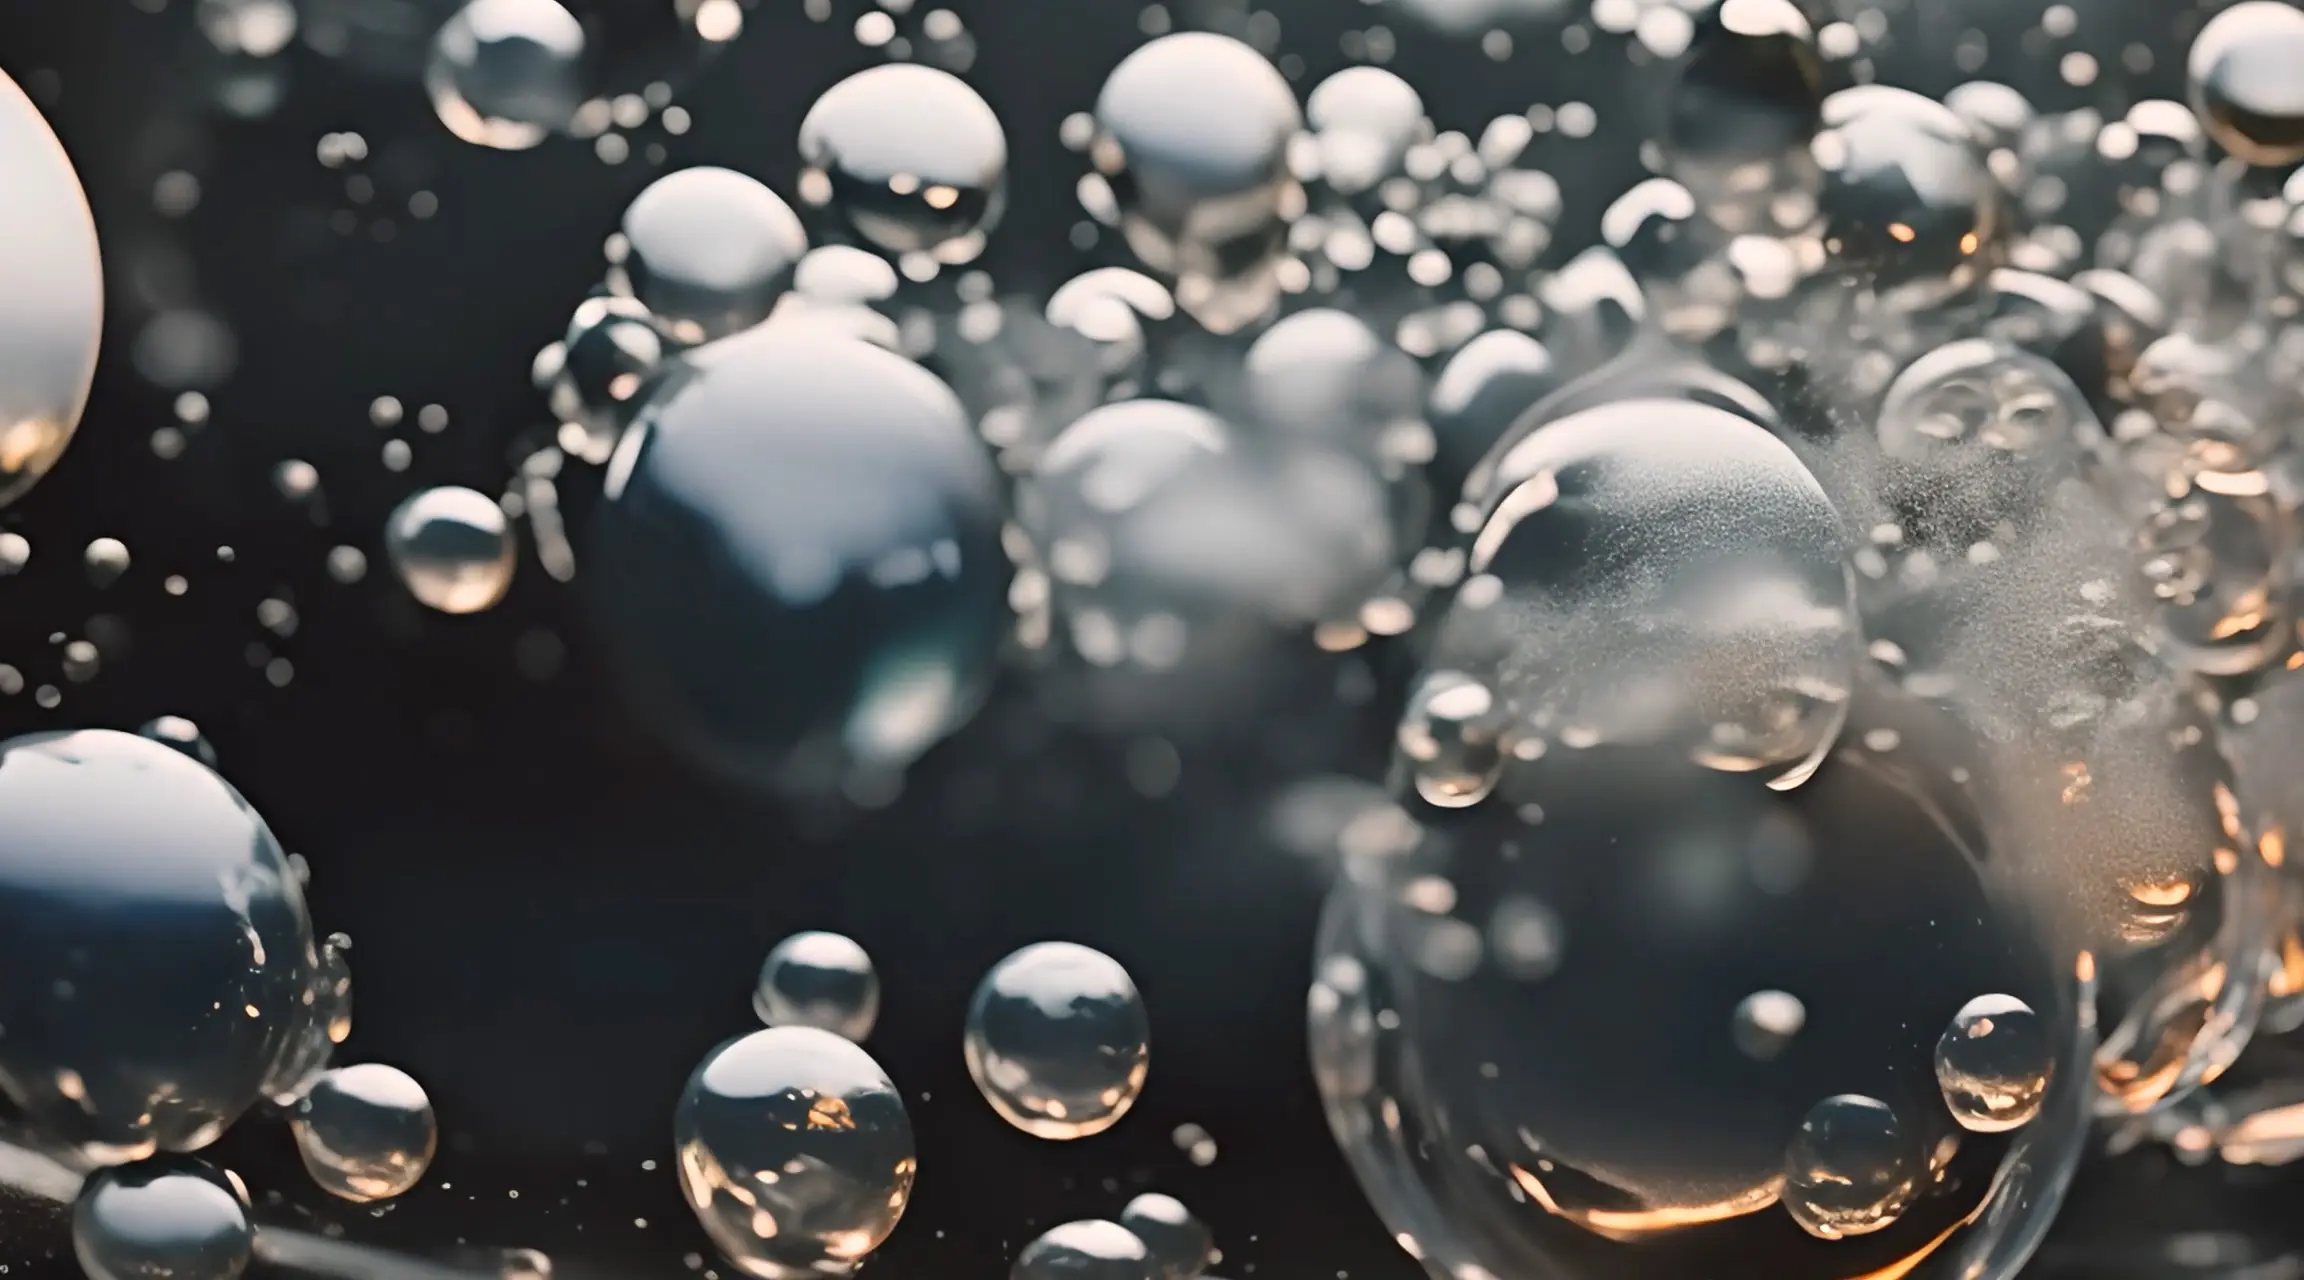 Suspended Droplets in Light Calming Stock Video